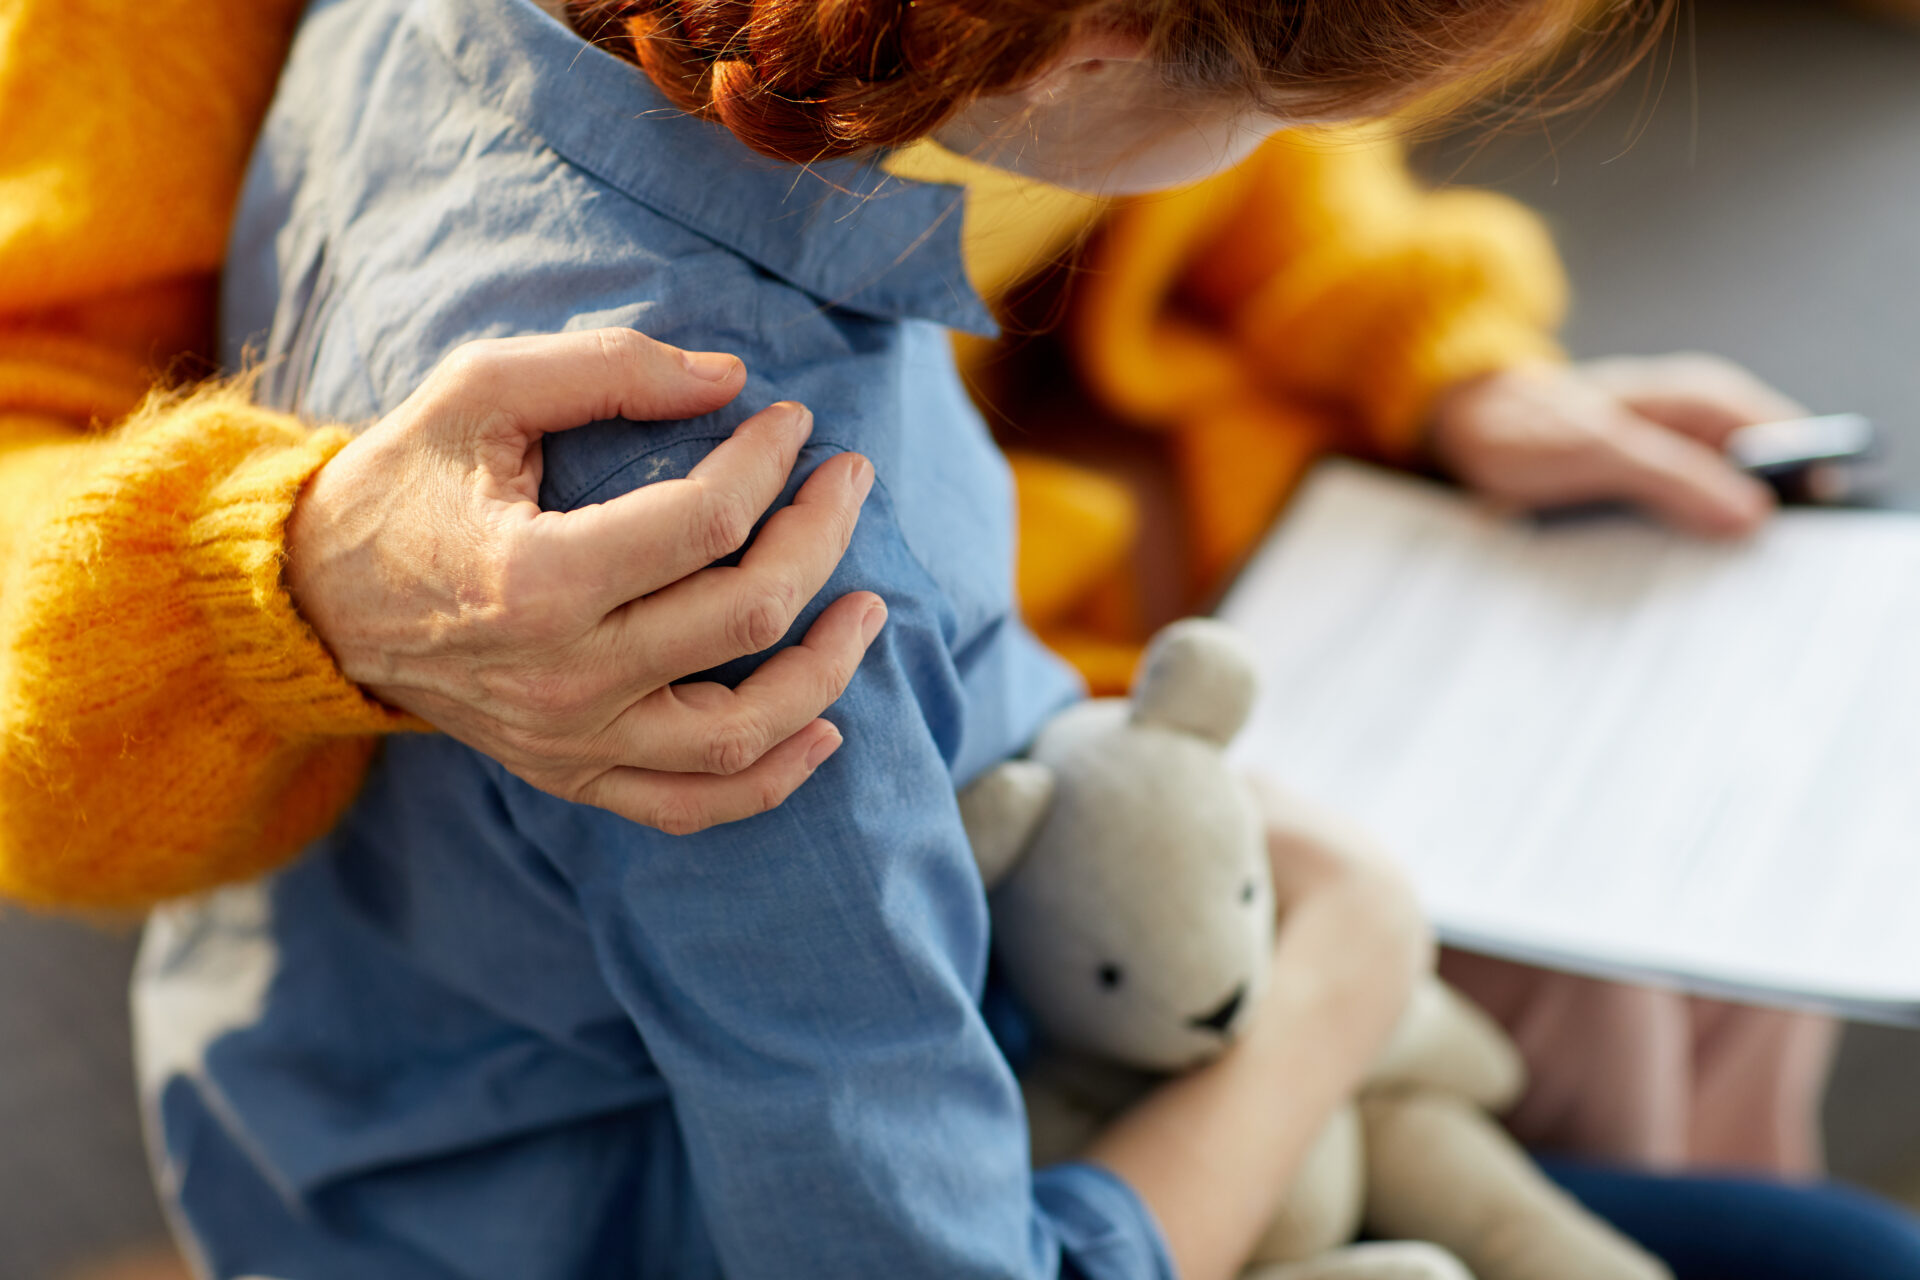 Child Welfare Removal: A Difficult Process For Children